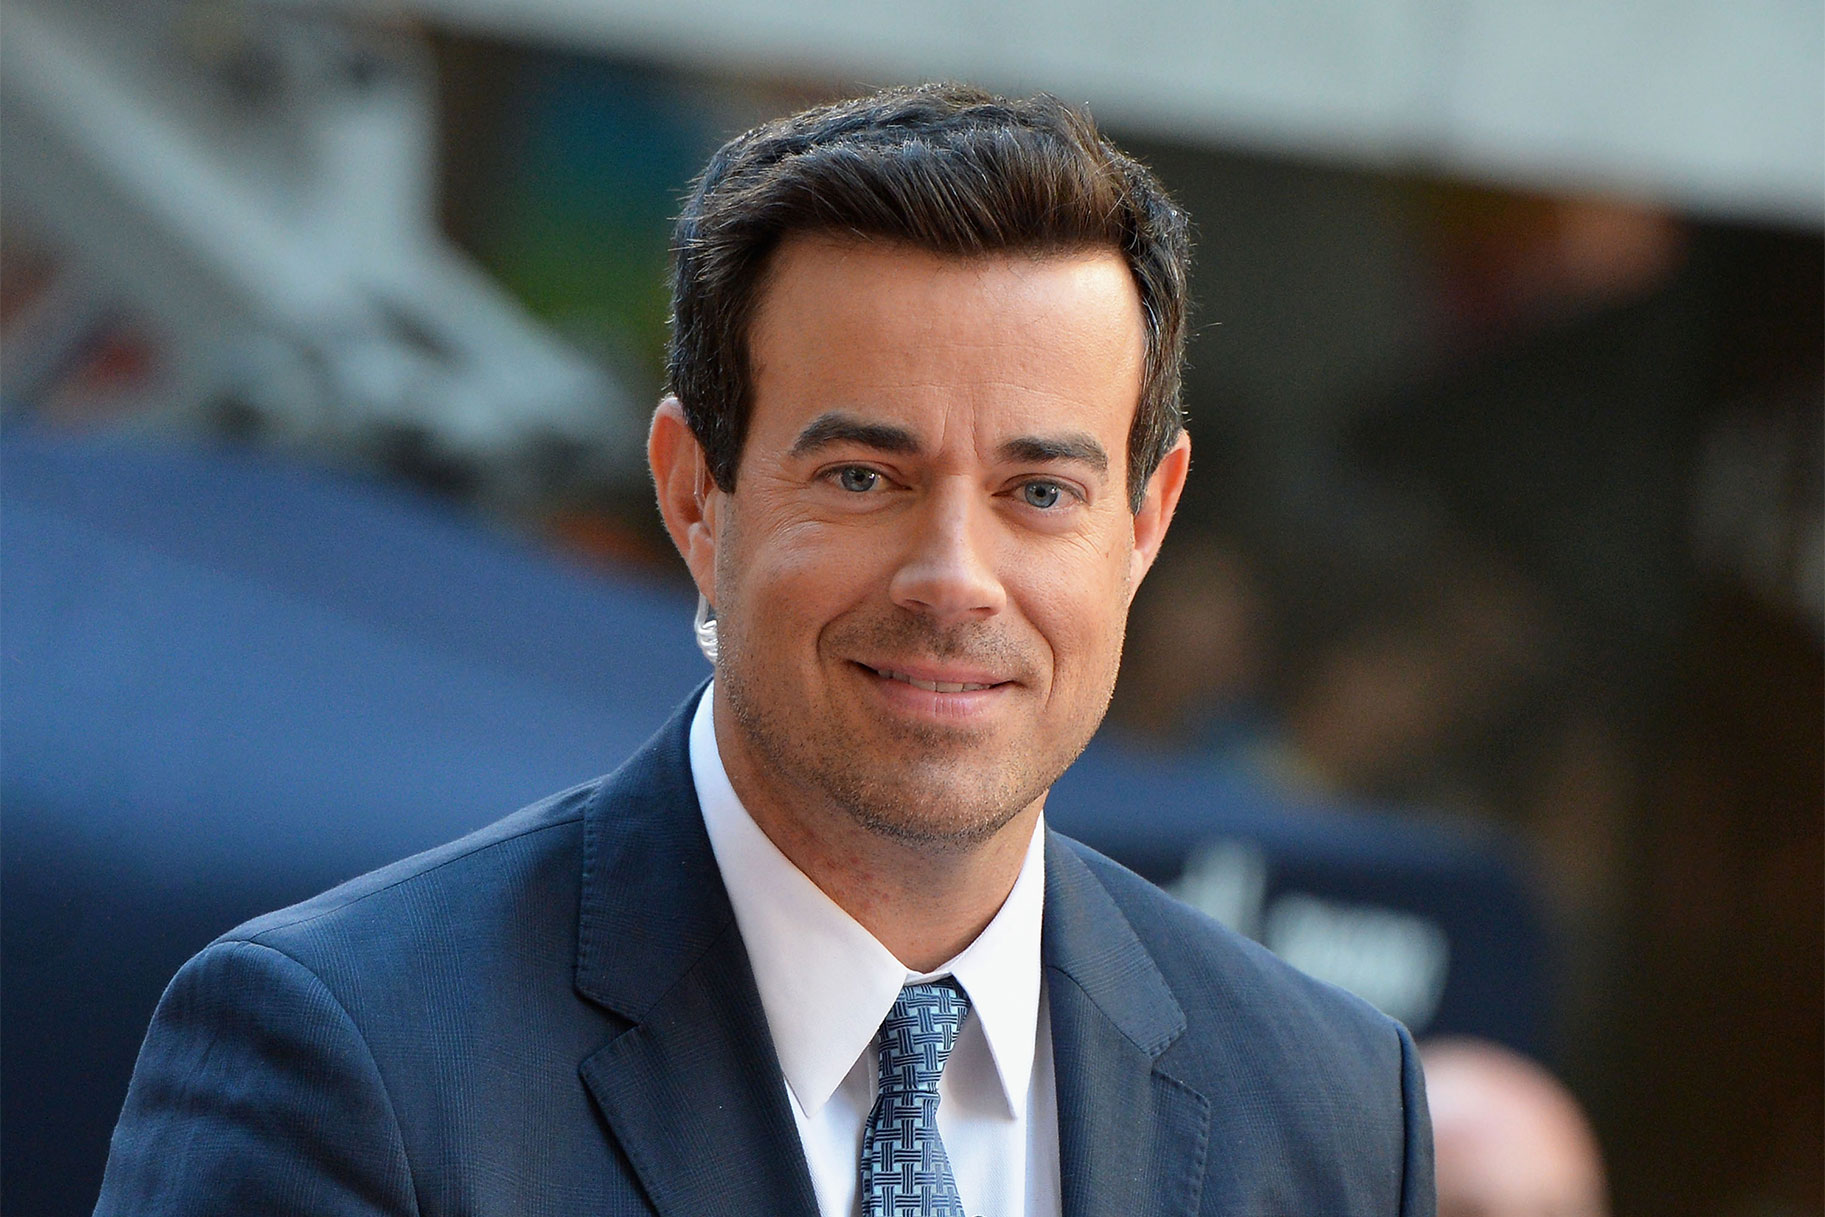 Carson Daly’s 15-year-old son could easily pass as his twin